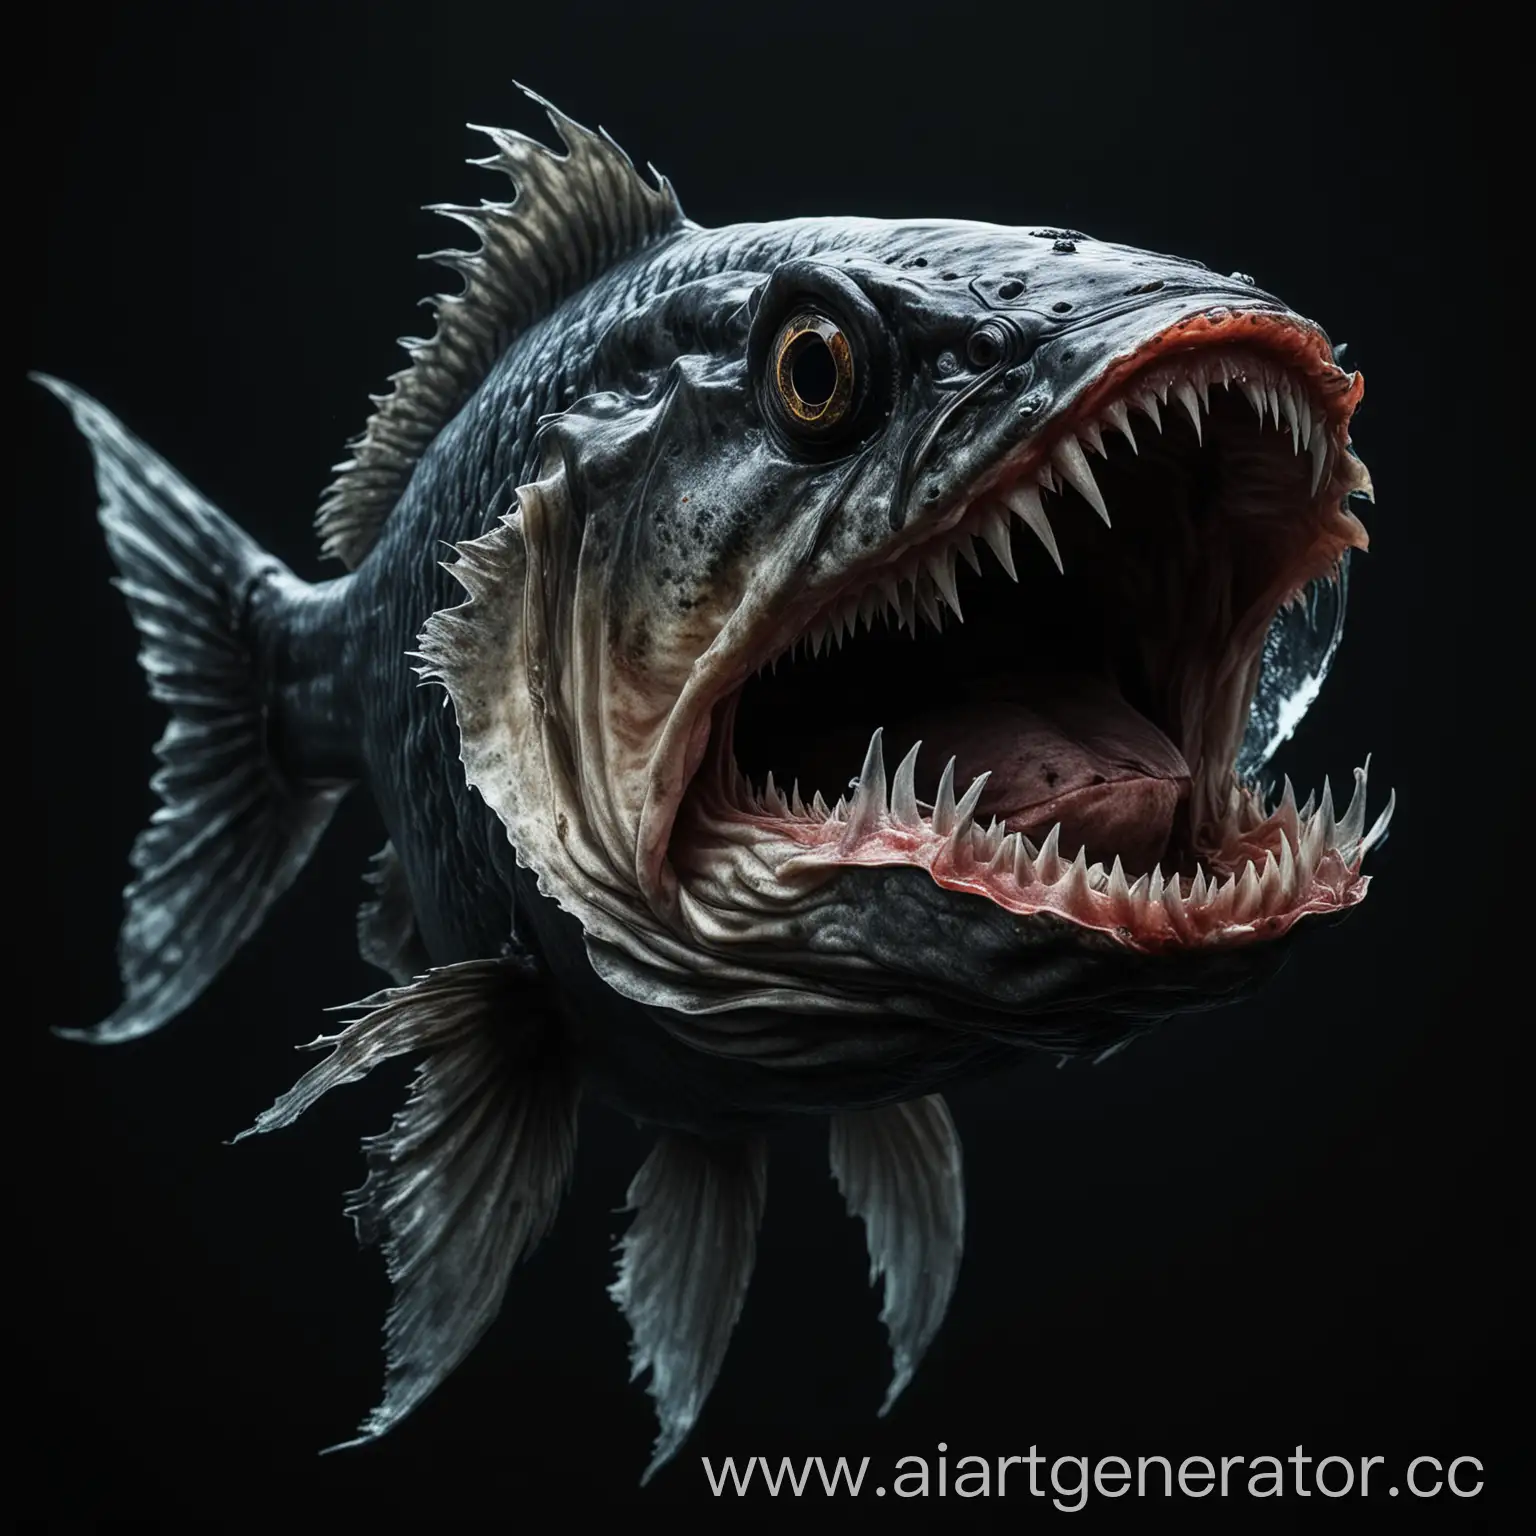 Sinister-Fangs-Realistic-Illustration-of-Terrifying-Fish-in-Dark-Environment